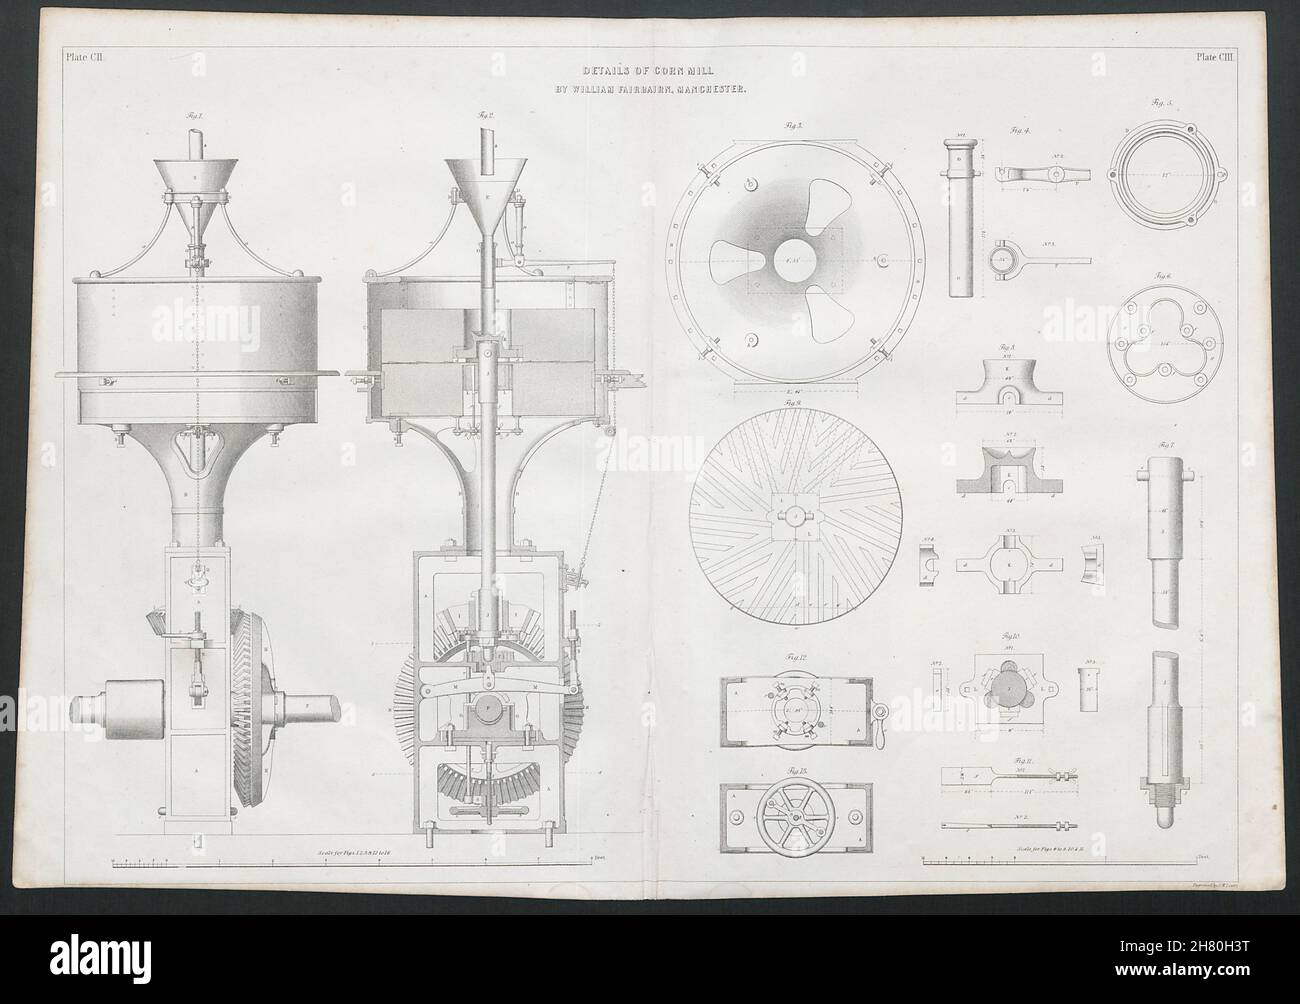 19C ENGINEERING DRAWING Details of corn mill. William Fairbairn, Manchester 1847 Stock Photo